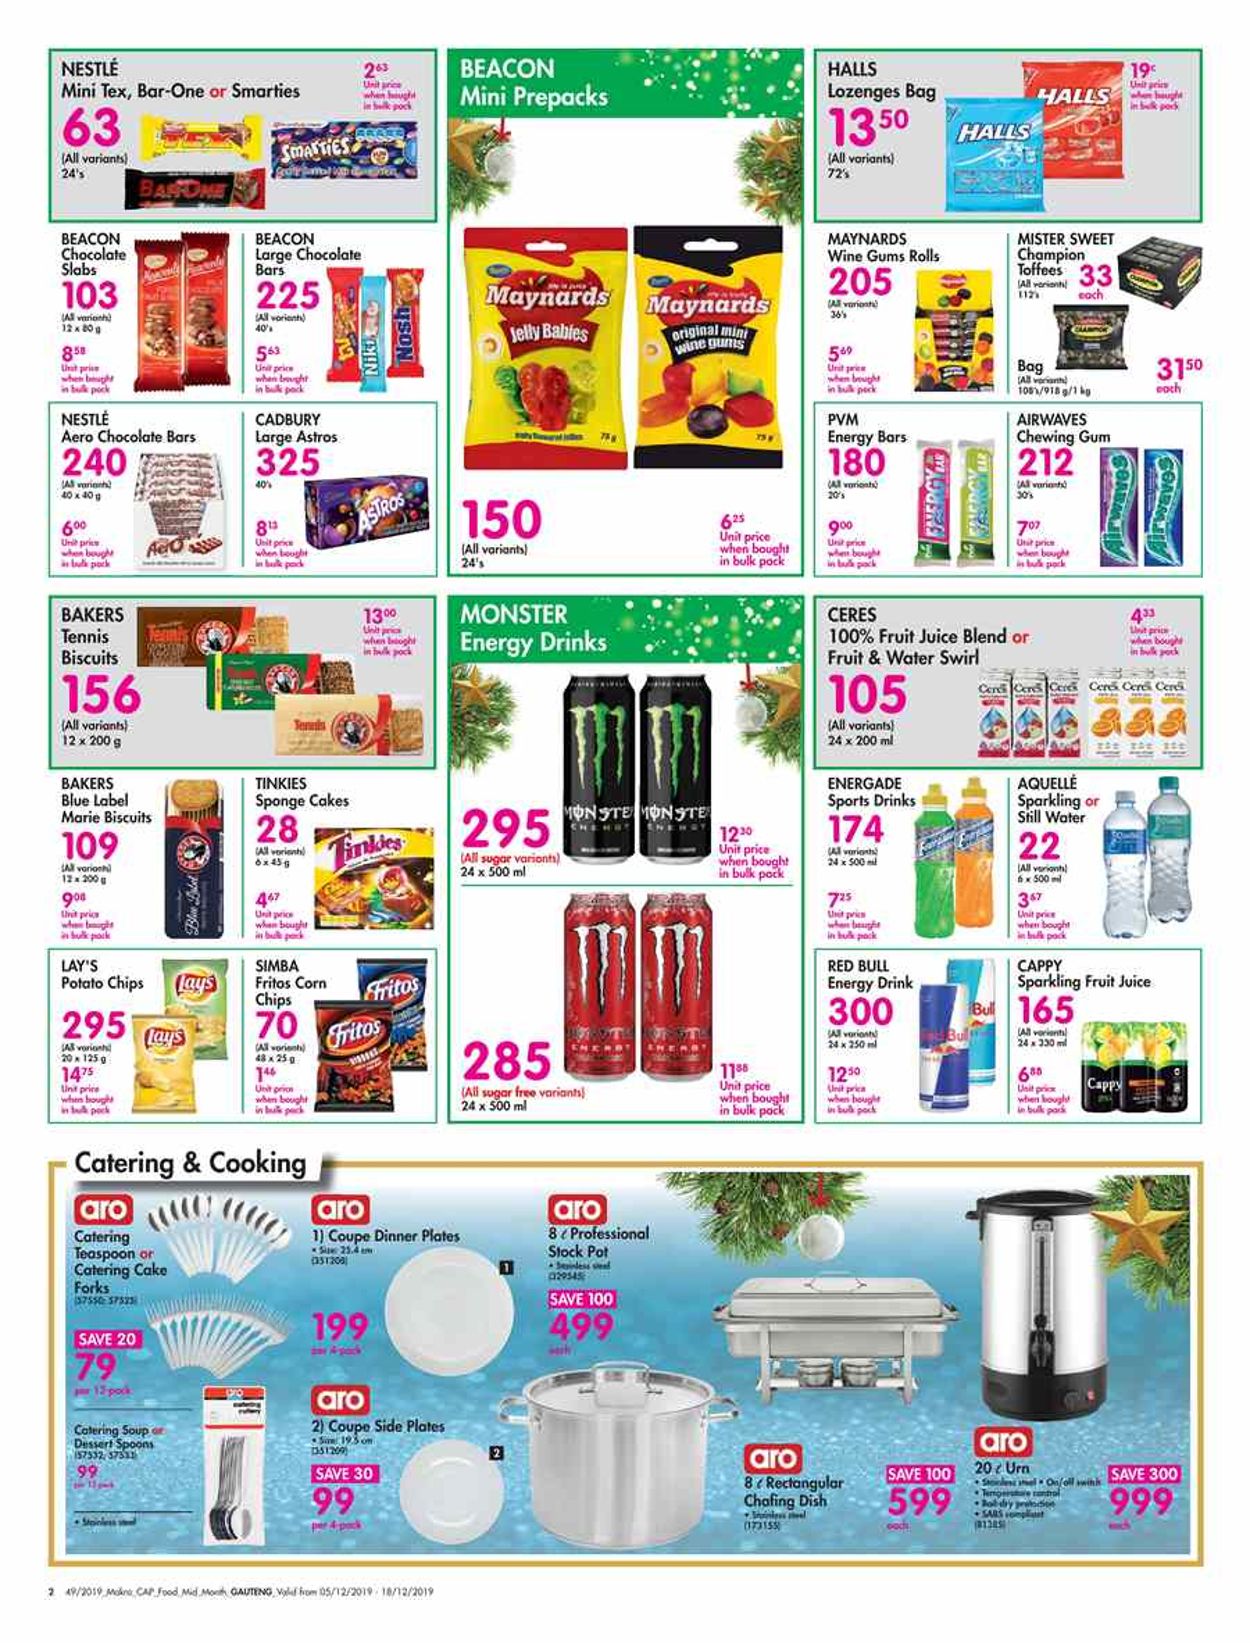 Makro Catalogue from 2019/12/05